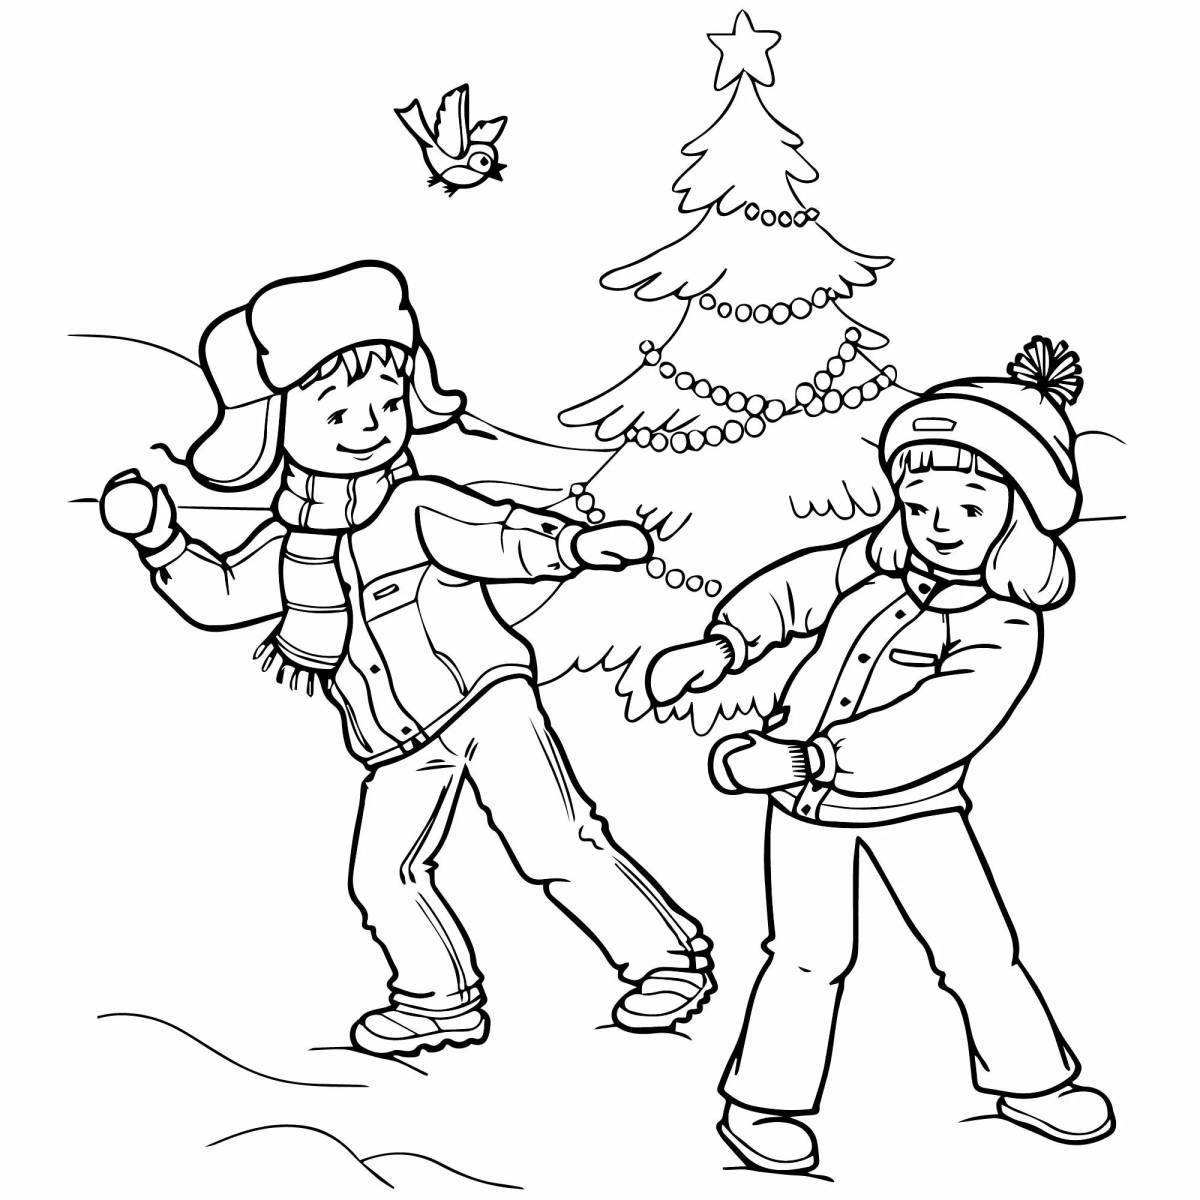 Adorable winter holidays coloring book for kids